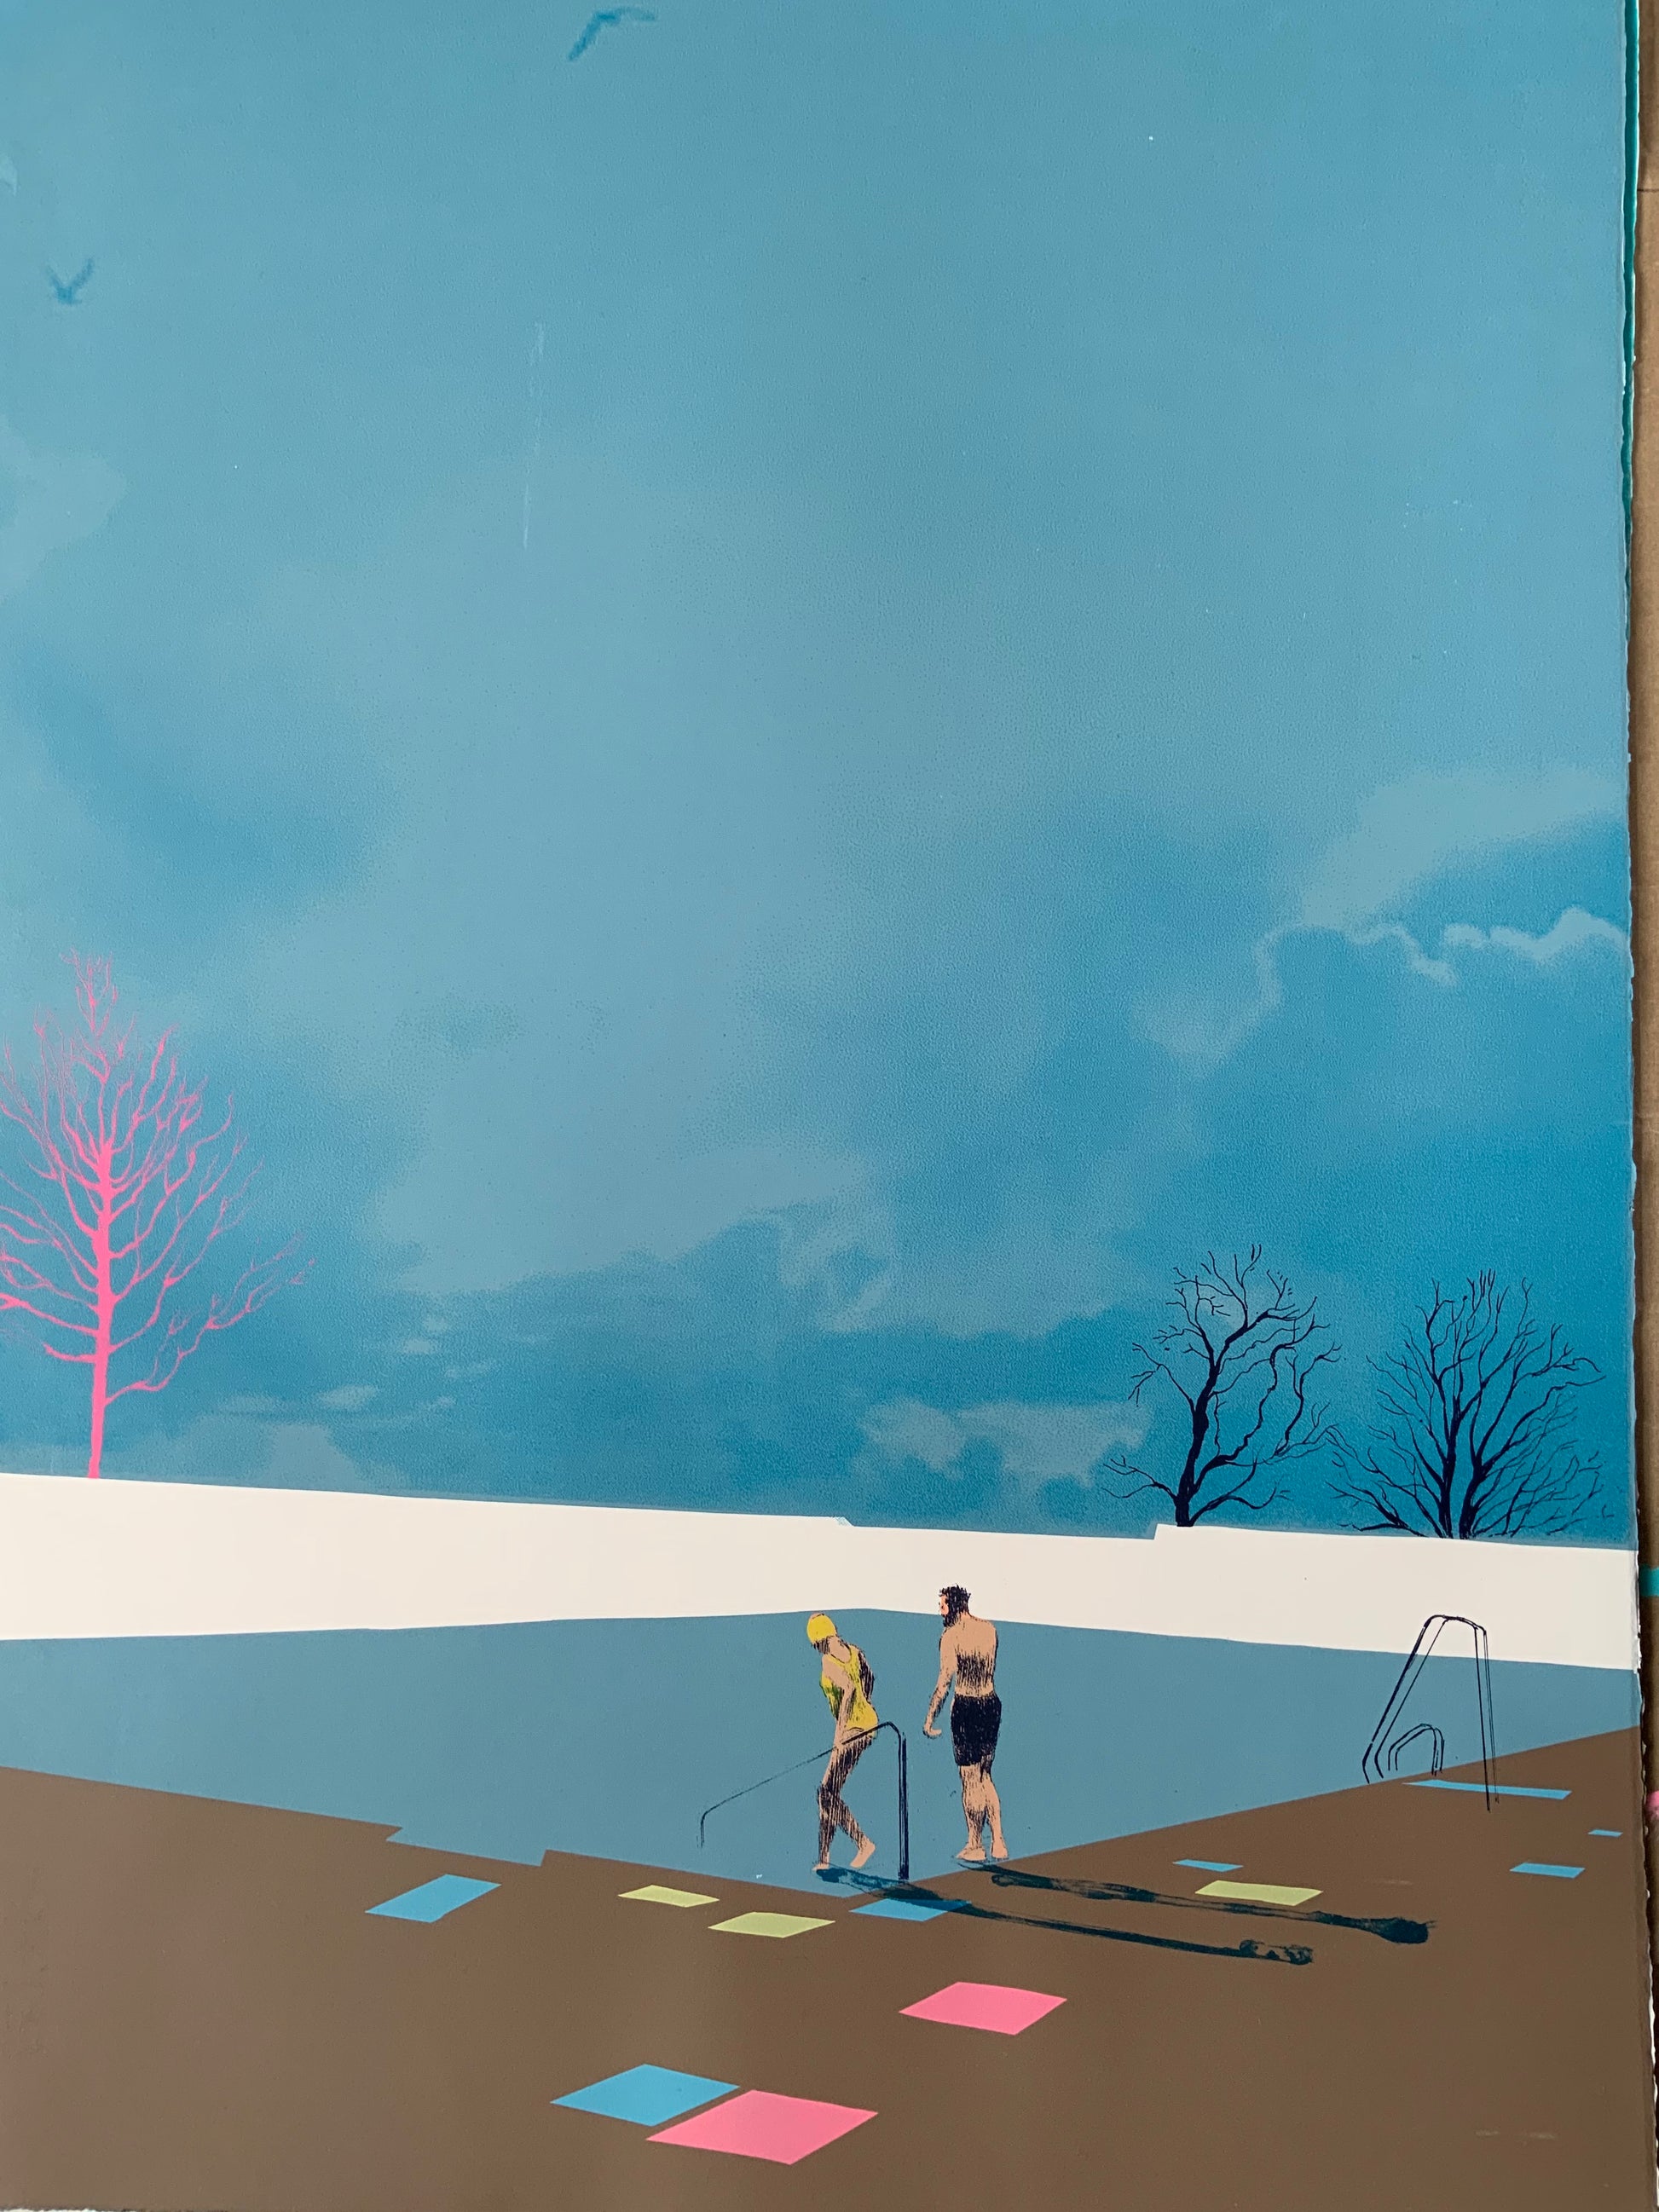 Anna-Marrow-Winter-Magic-Limited-Edition-TAP-Galleries-Hand-Painted-Screenprint-Pool-Blue-Sky